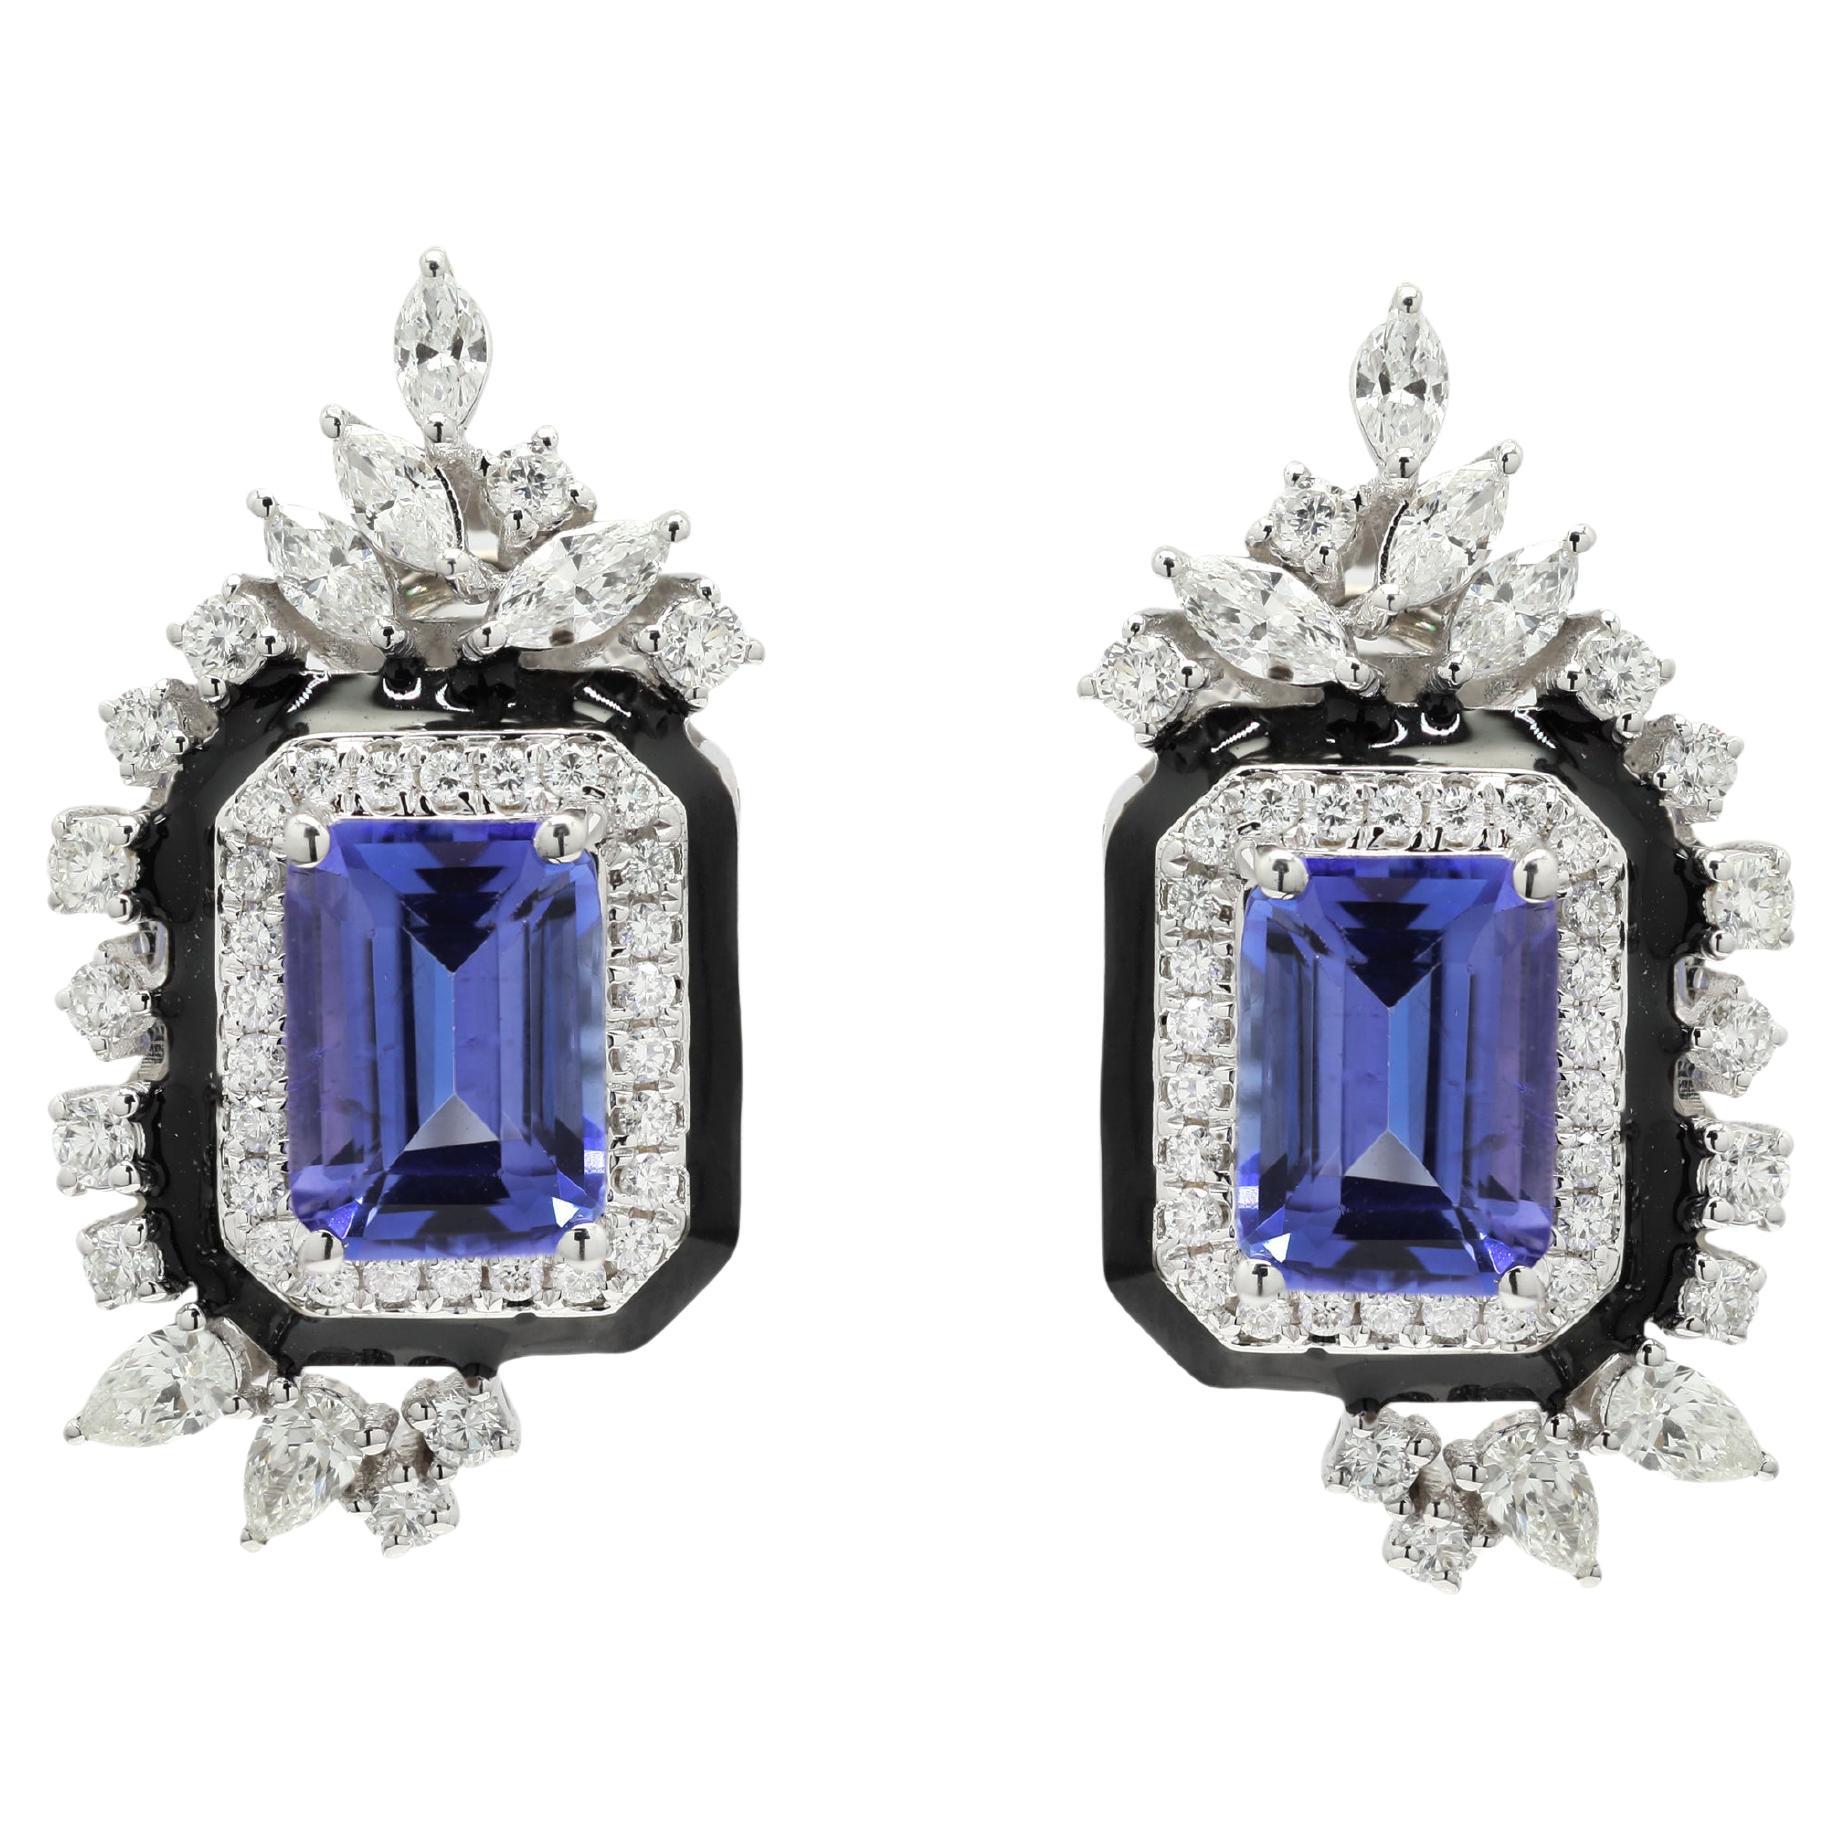 14K White Gold 3.12 ct Tanzanite Statement Stud Earrings Studded with Diamonds For Sale